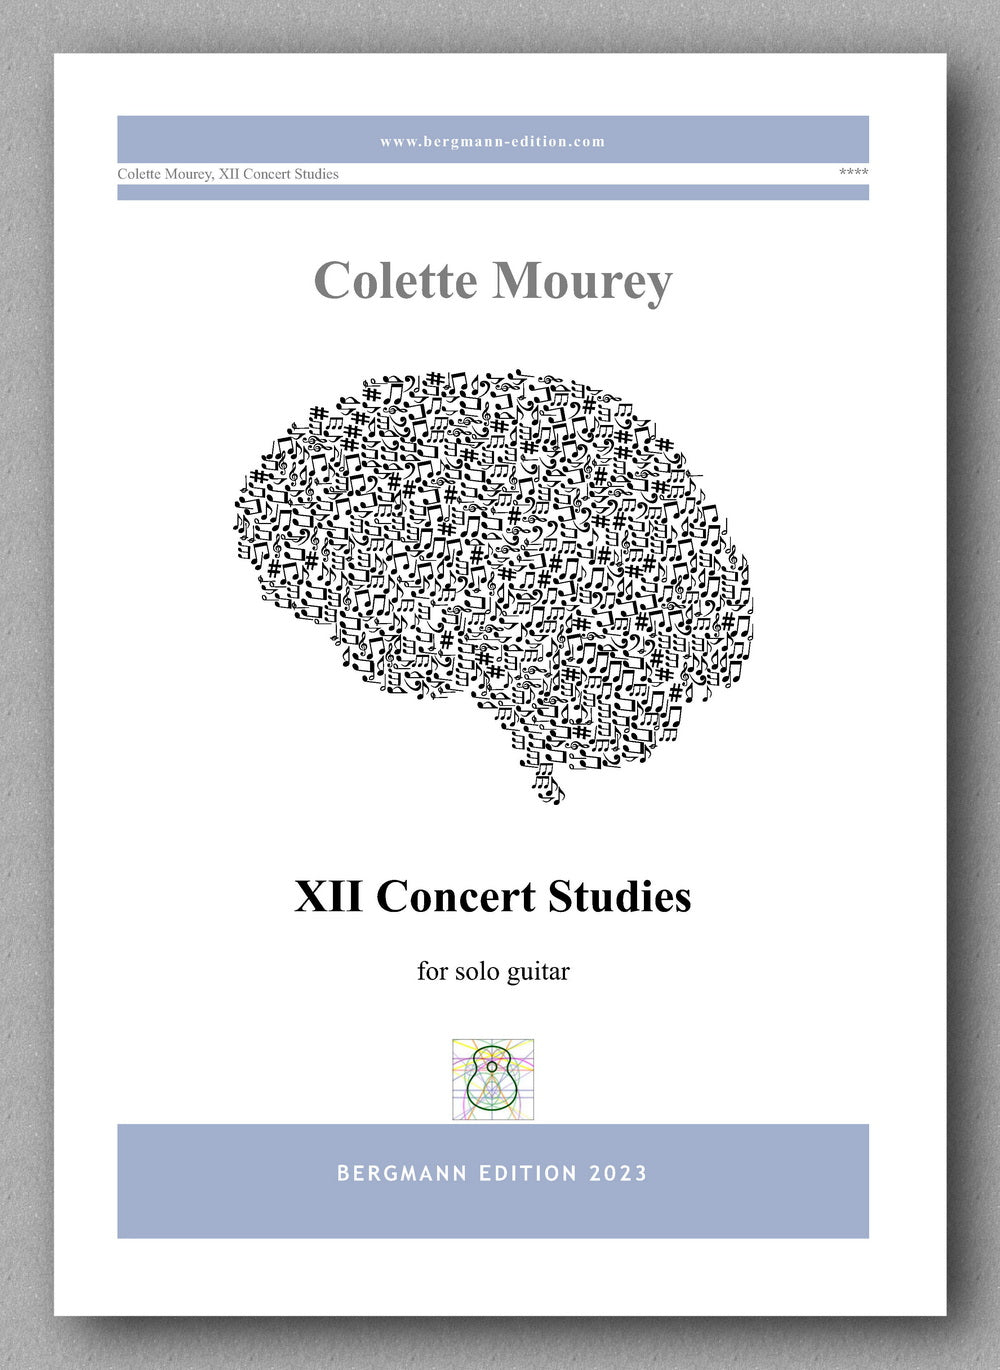 Colette Mourey, XII Concert Studies - preview of the cover